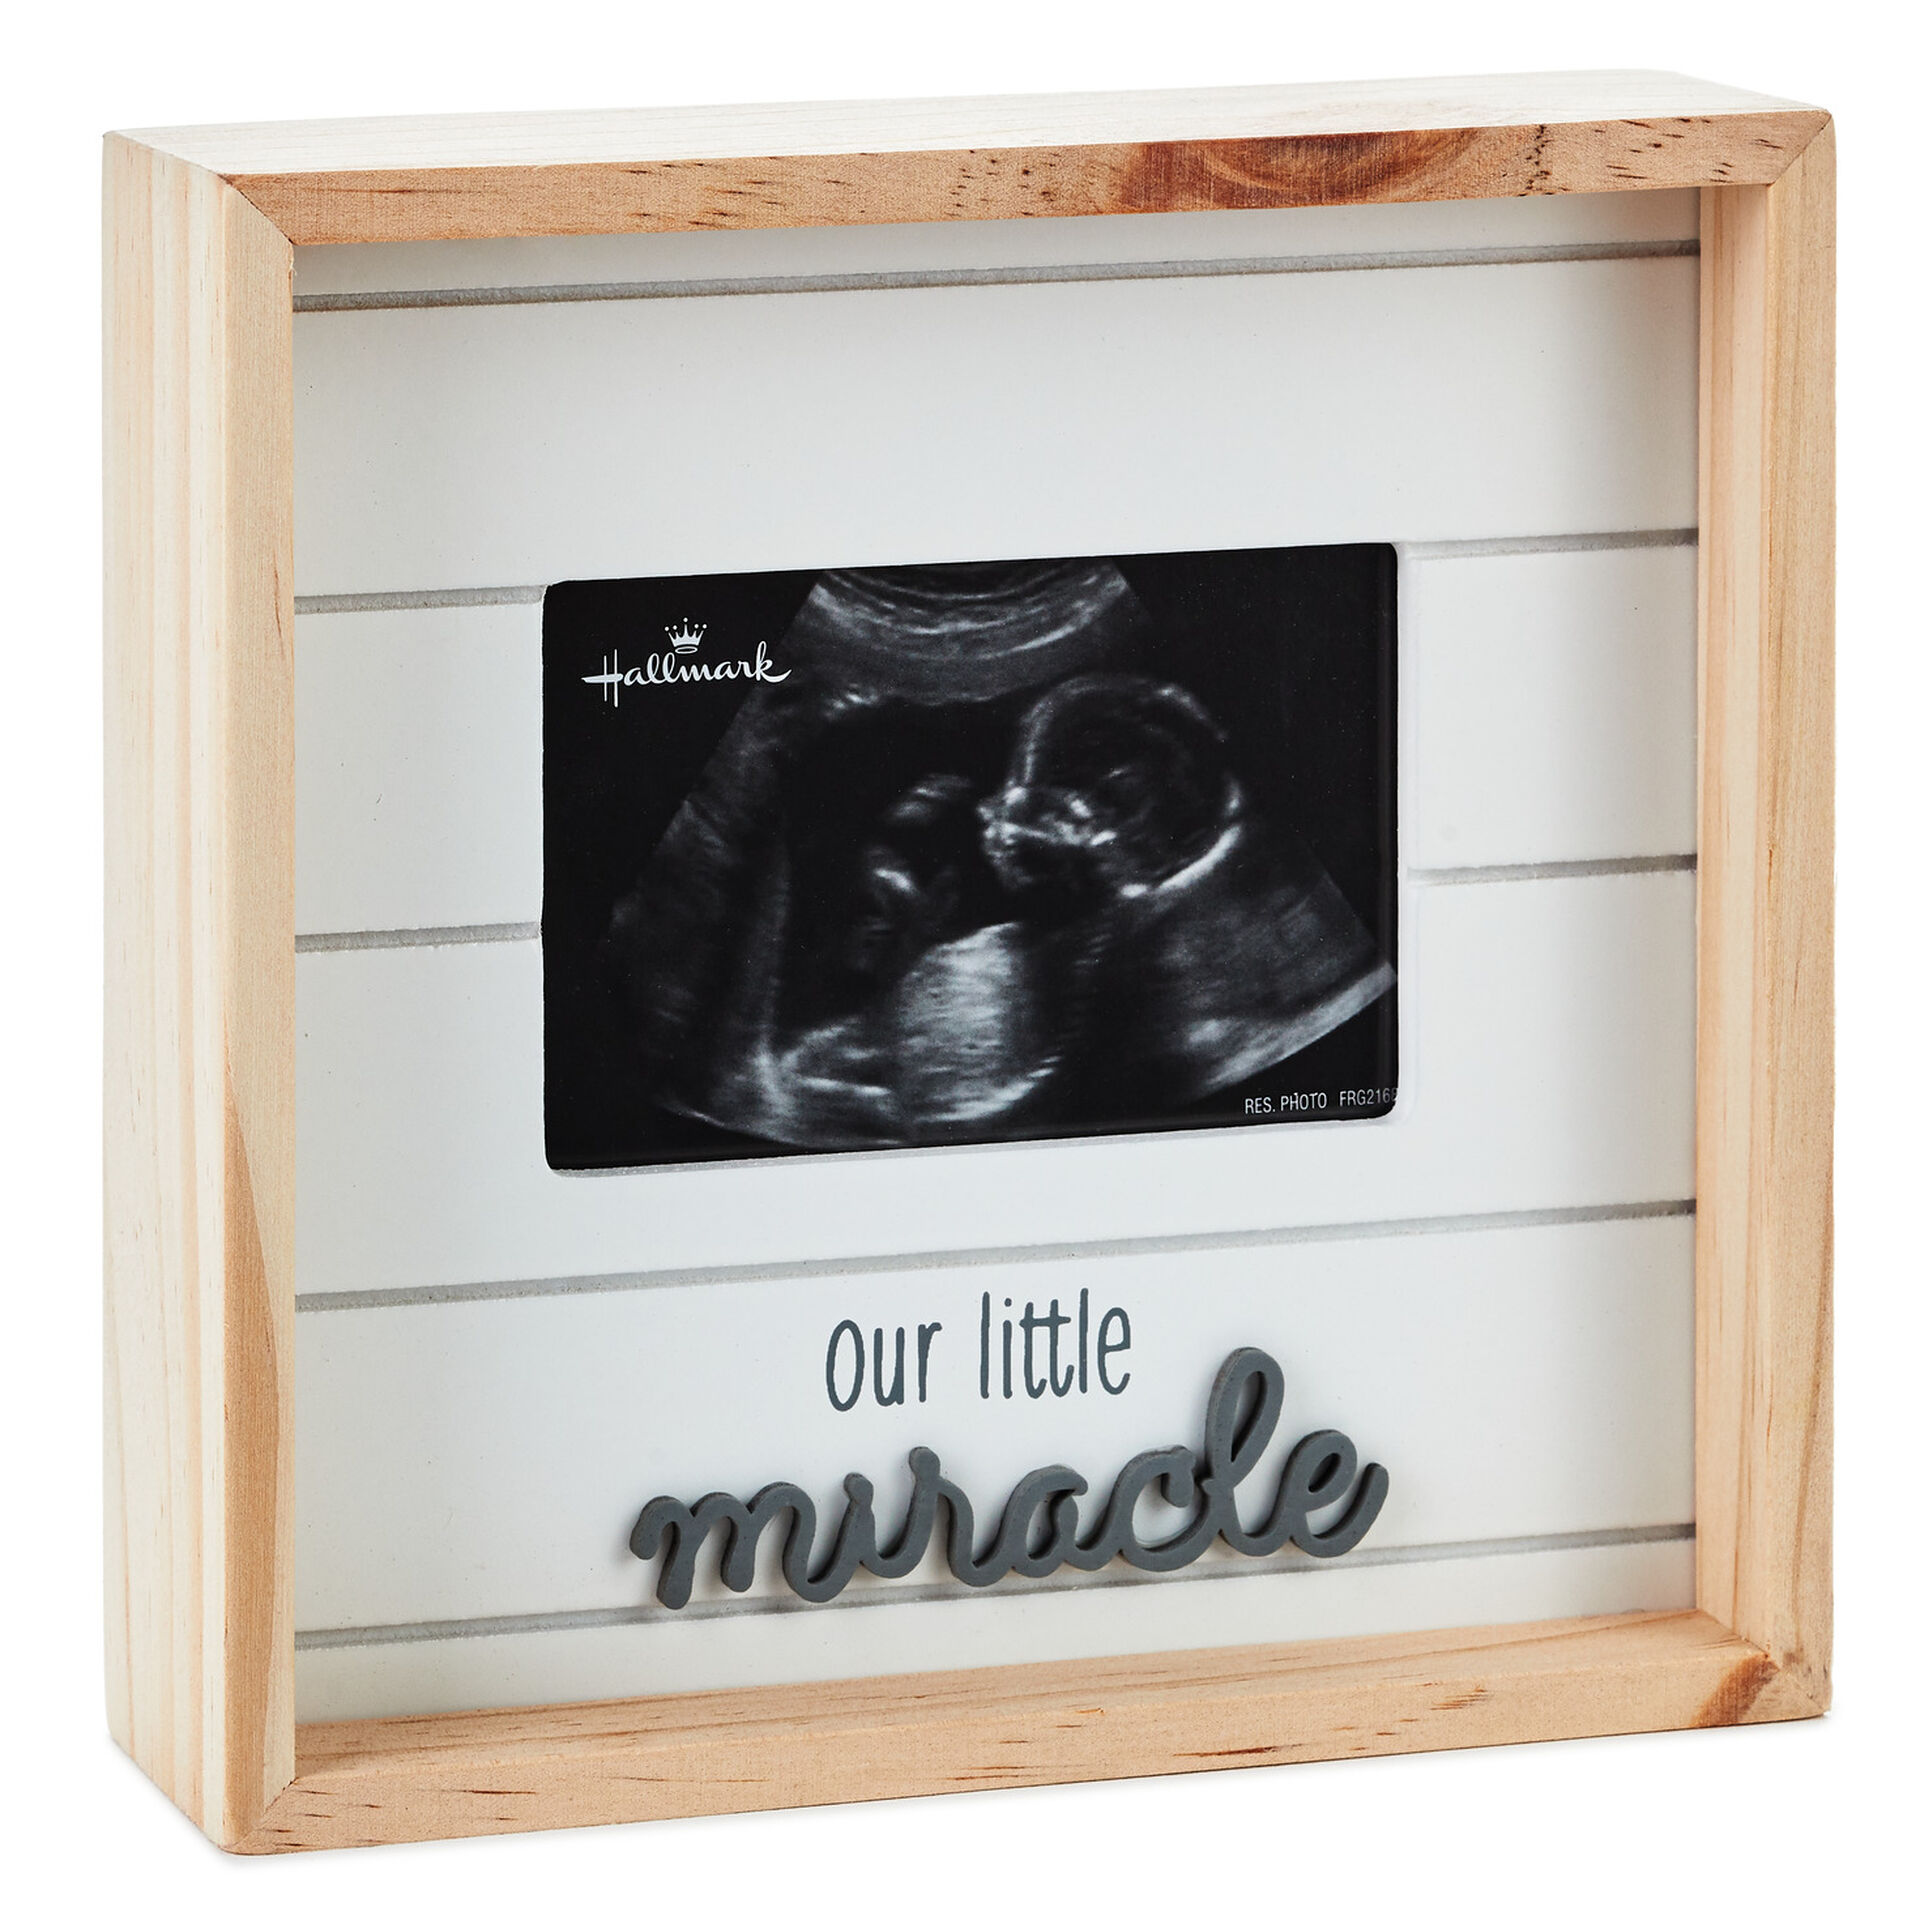 11x2.5" Personalised Wooden Family Photo & Text Block Best Friend Baby Gift .